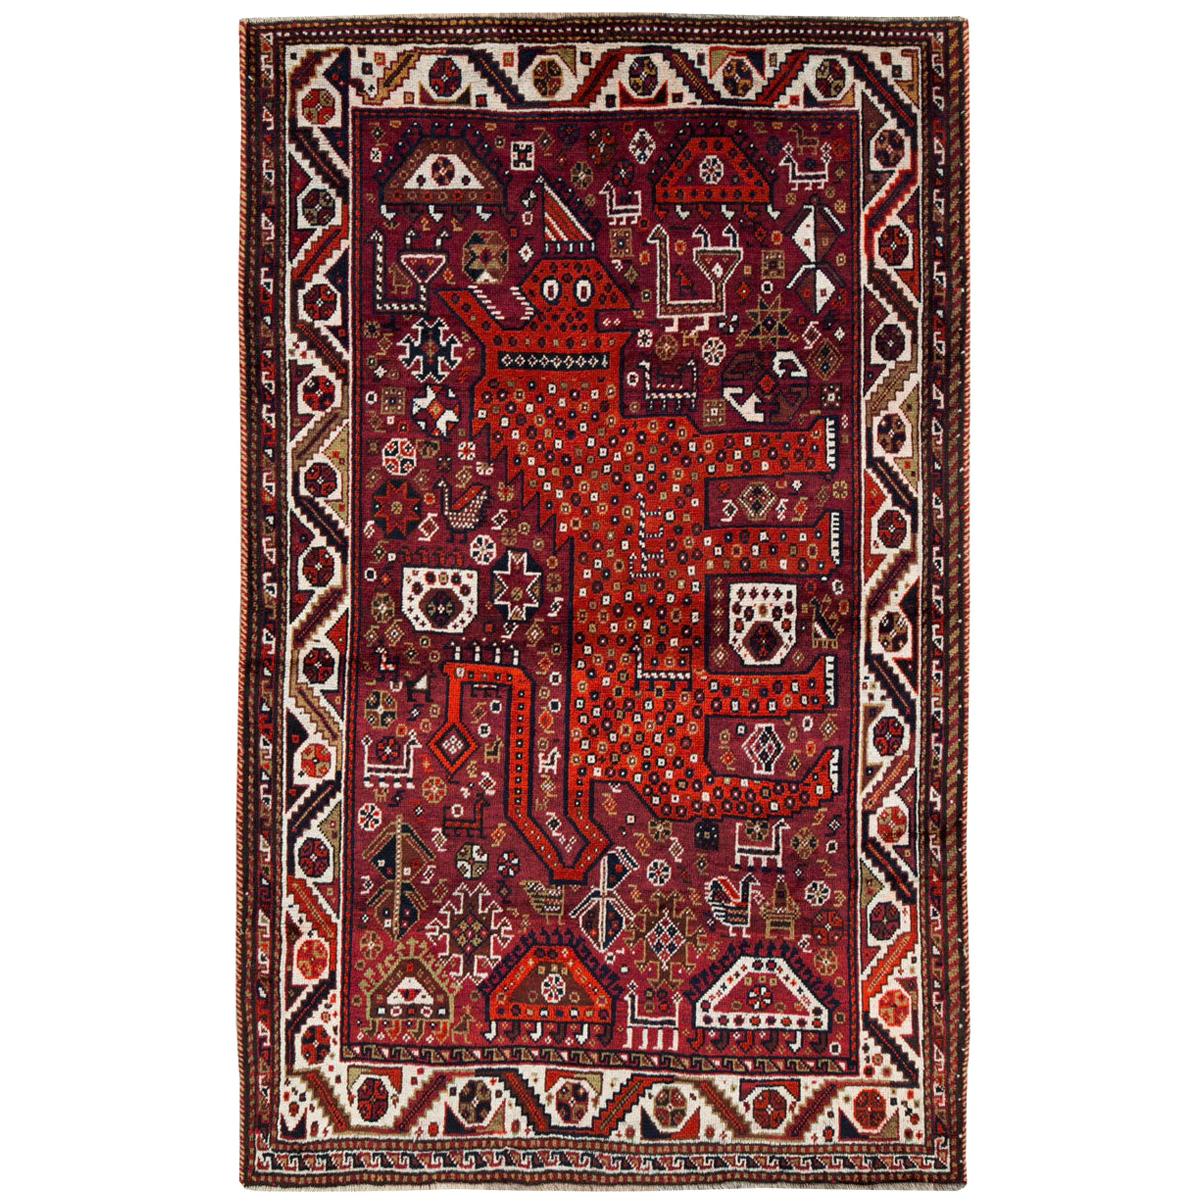 Tribal Mid-20th Century Persian Qashqai Pictorial Lion Accent Rug in Burgundy For Sale